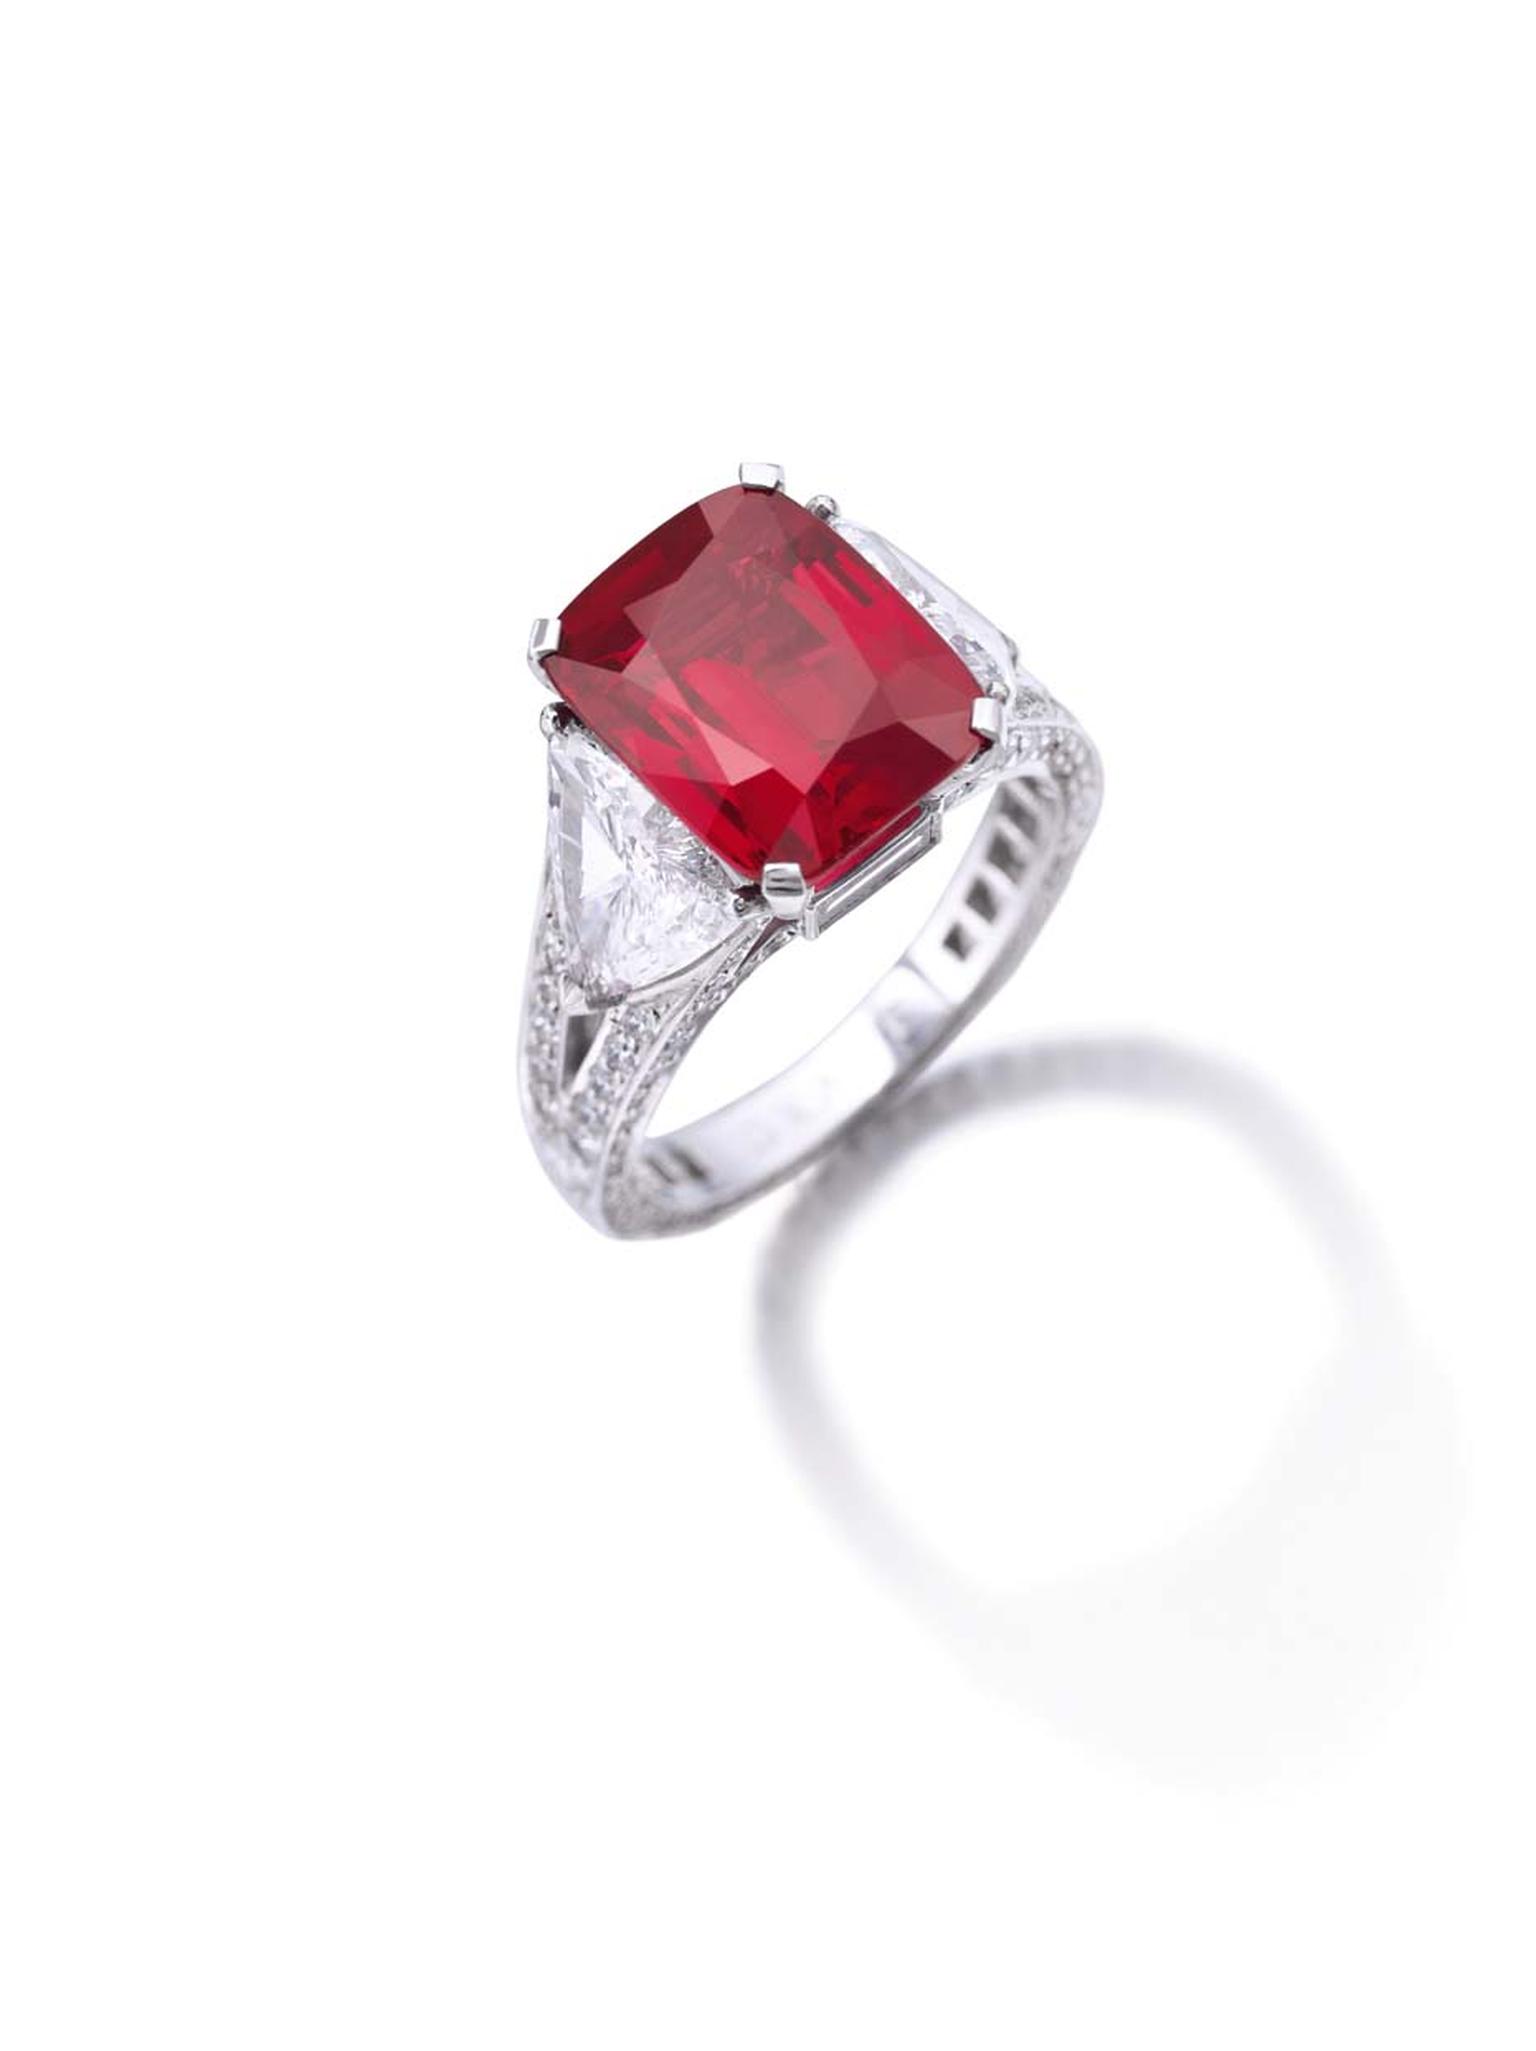 A Graff Ruby ring featuring a cushion-cut 8.62ct Burmese ruby in a “pigeon’s blood” shade of red (estimate:US $6.8 - 9 million).